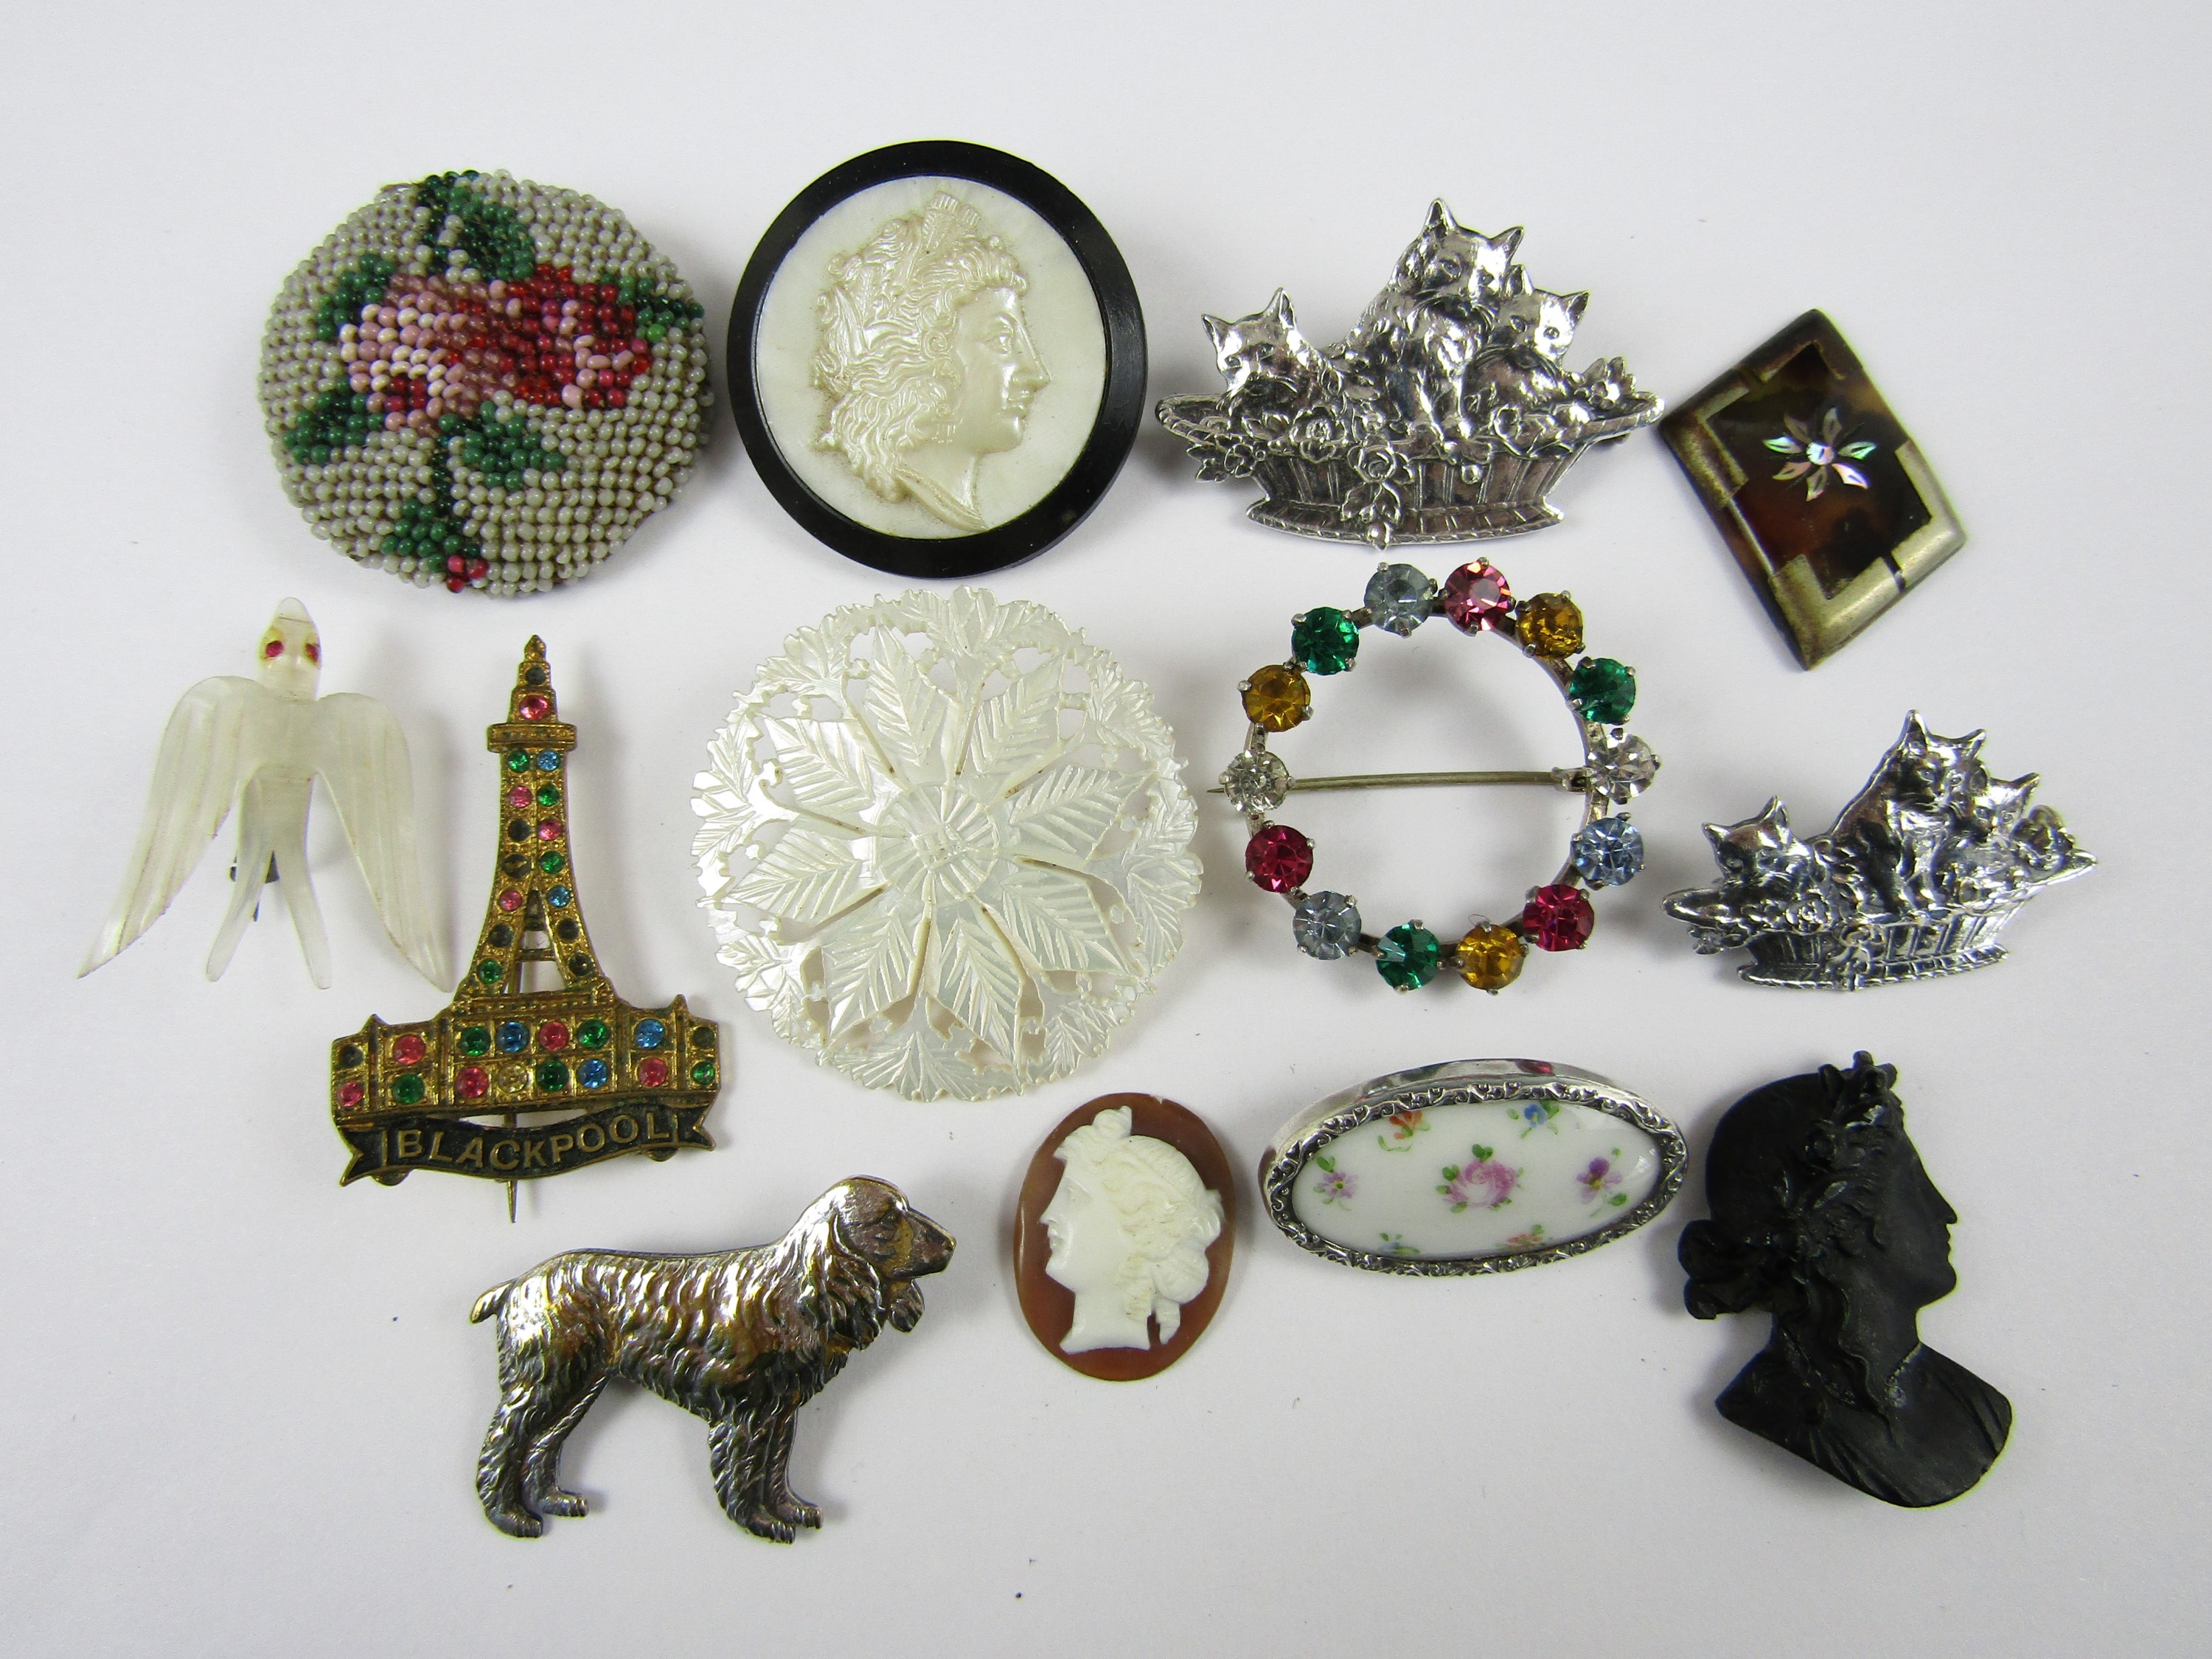 Vintage costume jewellery including a carved mother of pearl brooch, and white metal novelty